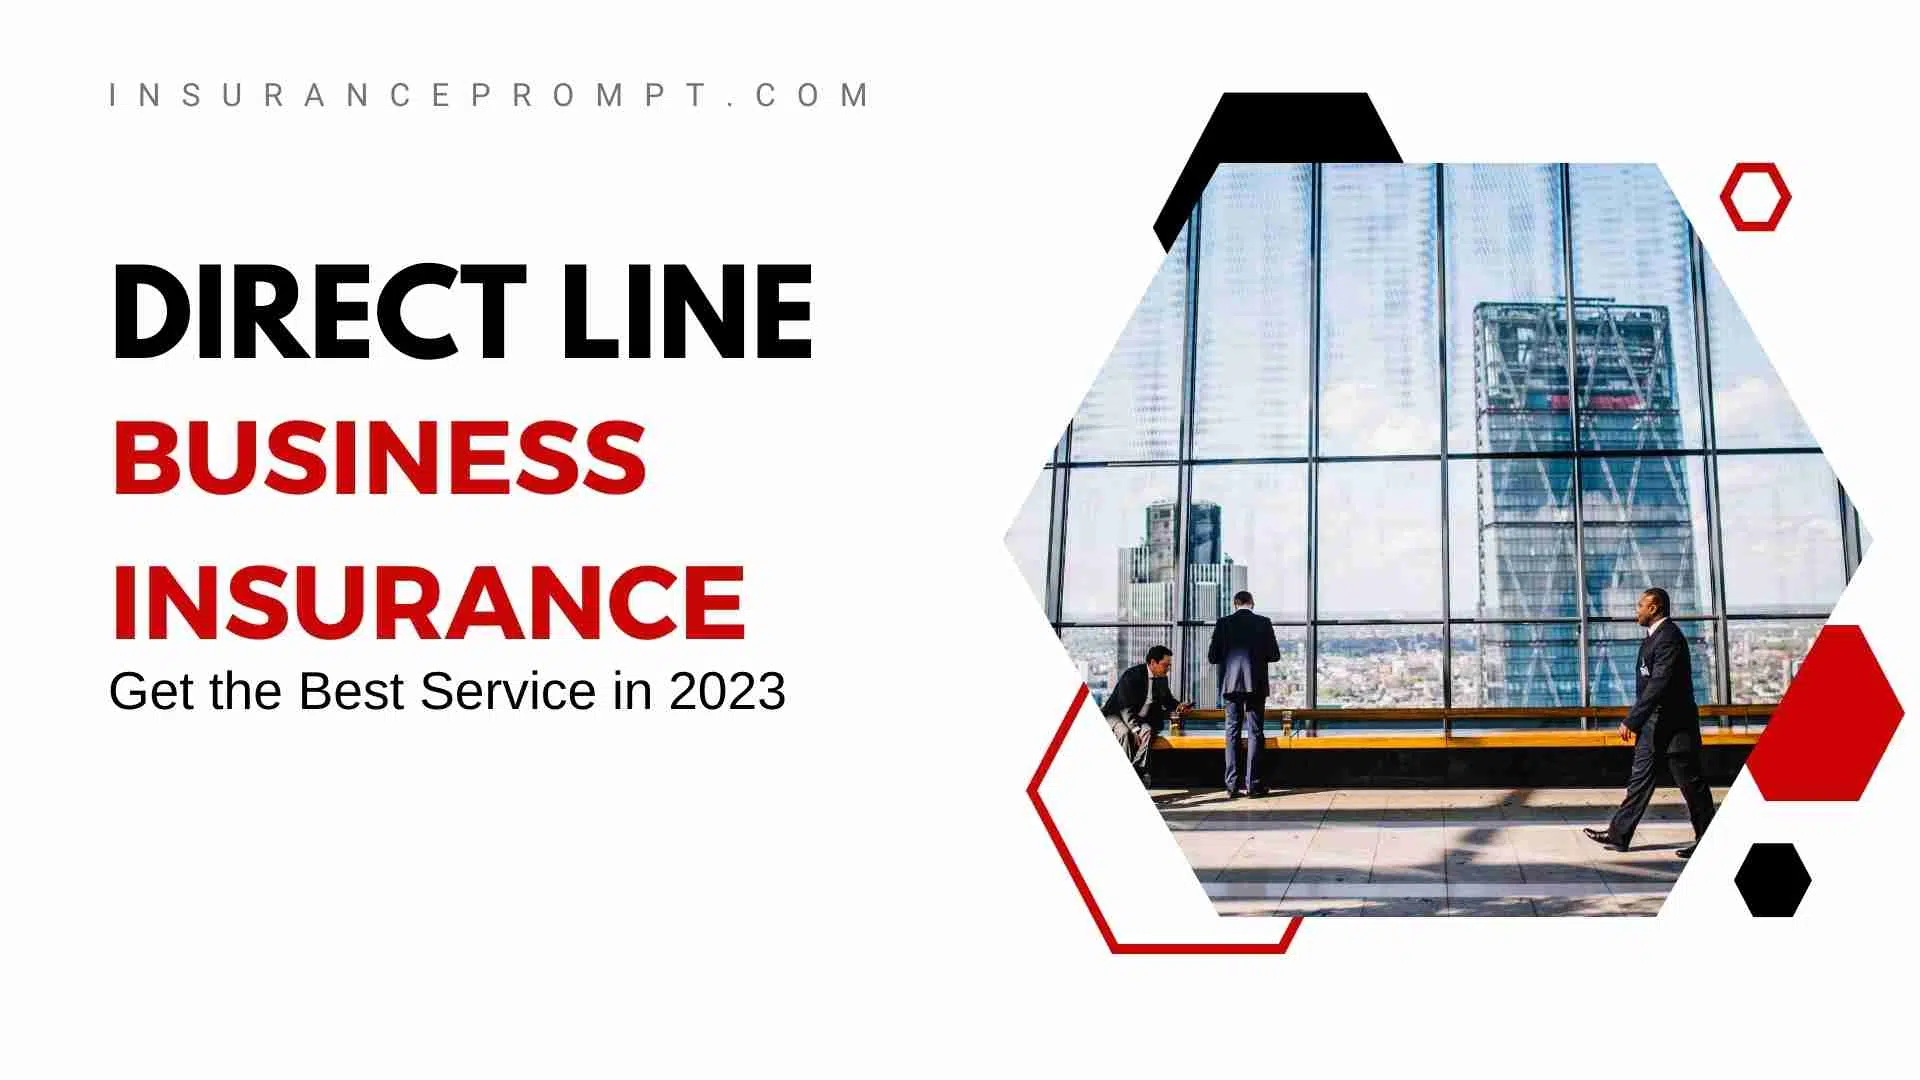 Direct Line Business Insurance